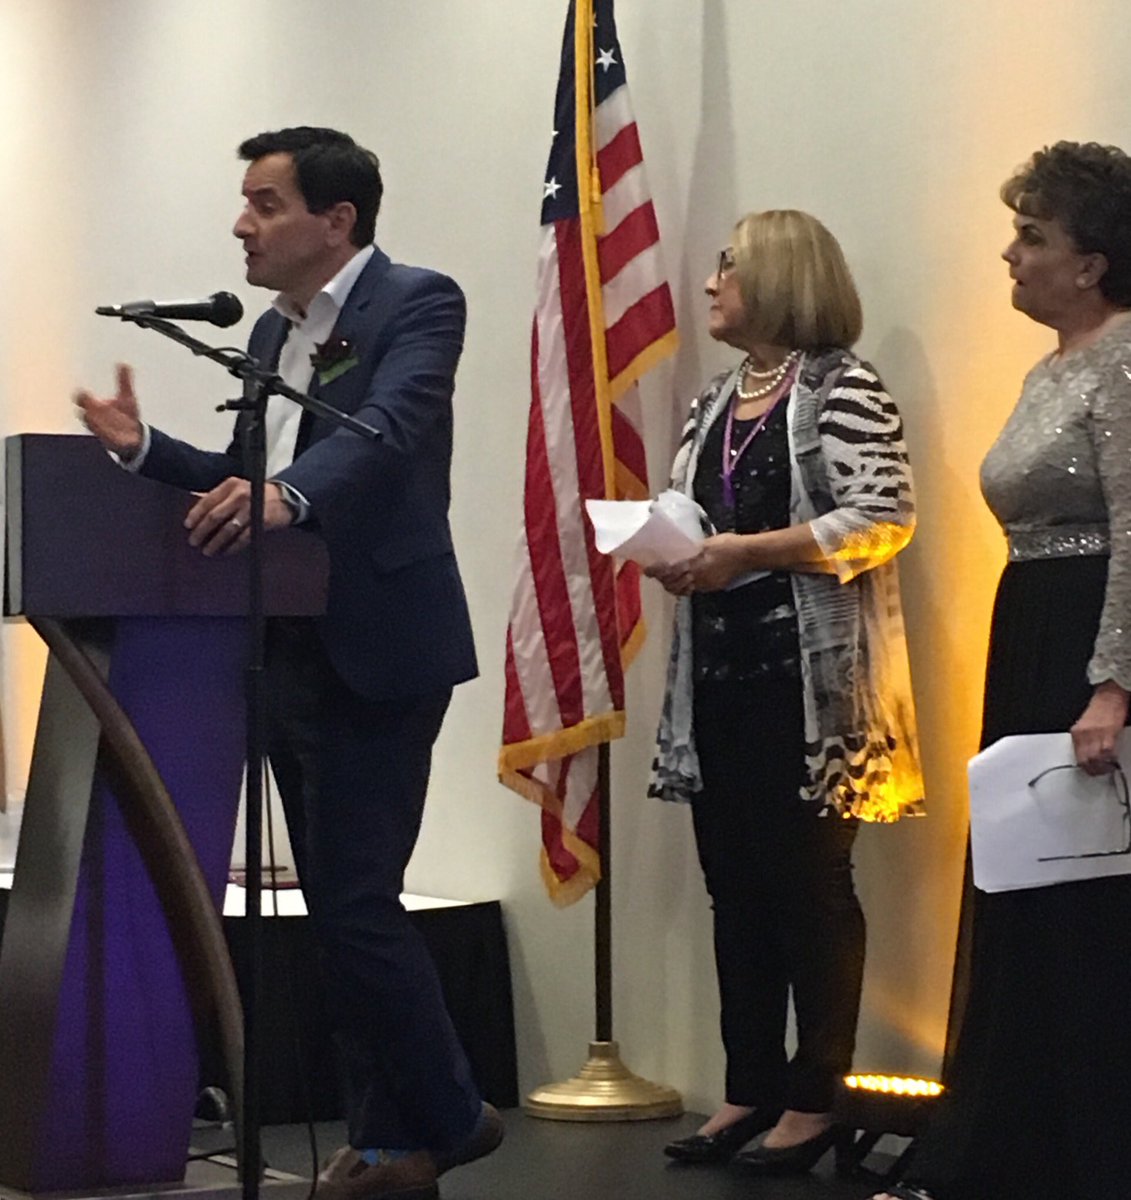 Thanks for your leadership @Rendon63rd — recipient of our @dredhernandez #HealthcarHero Award #PatientSafety #SB227